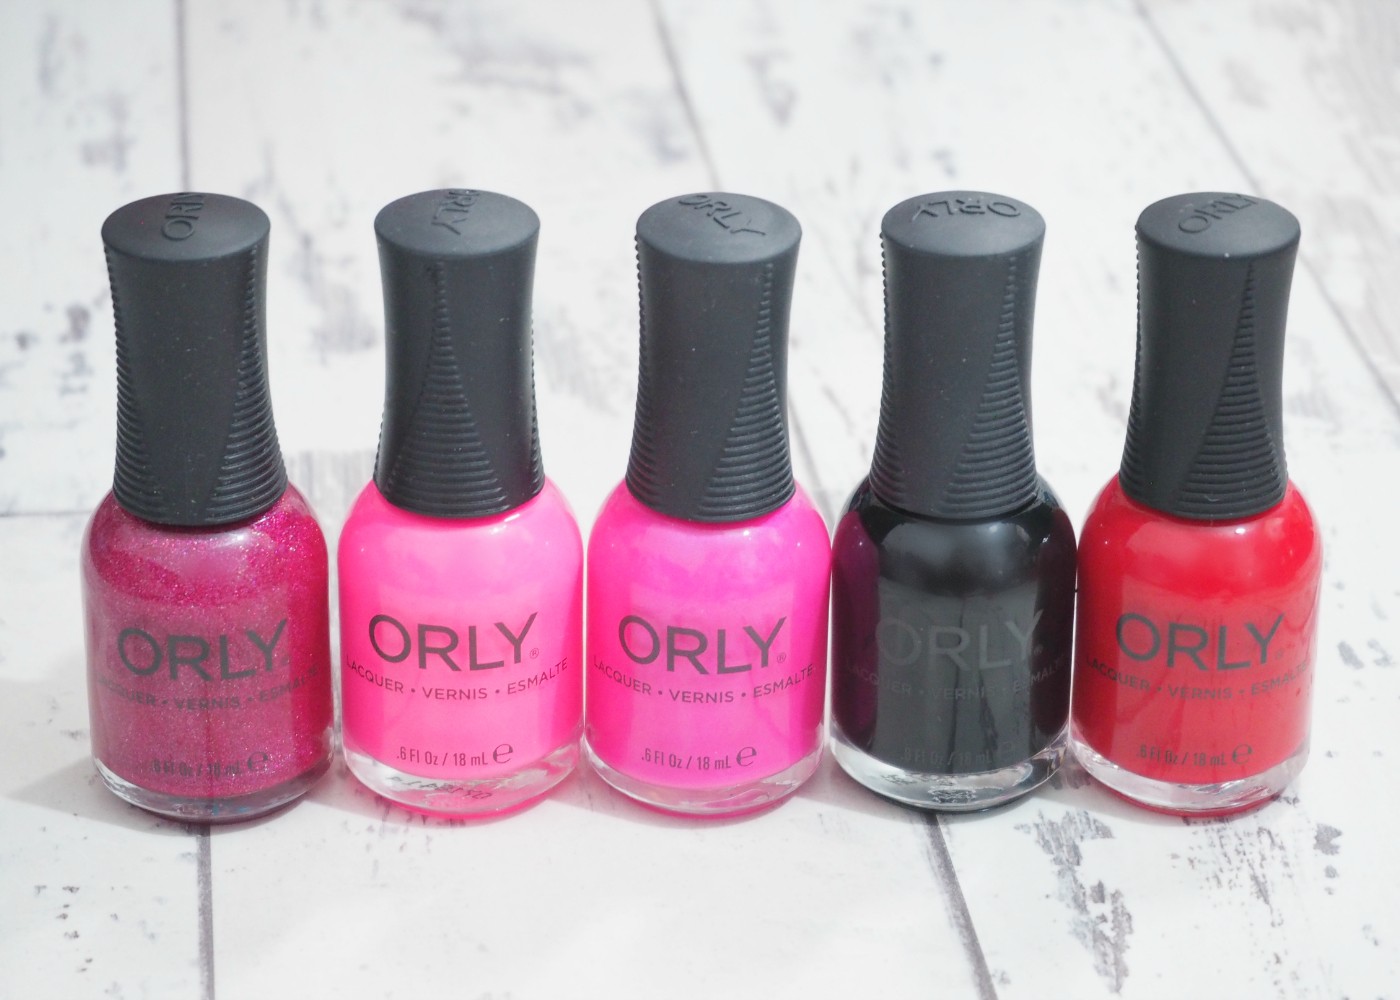 10. Orly Nail Lacquer in "Green with Envy" - wide 1